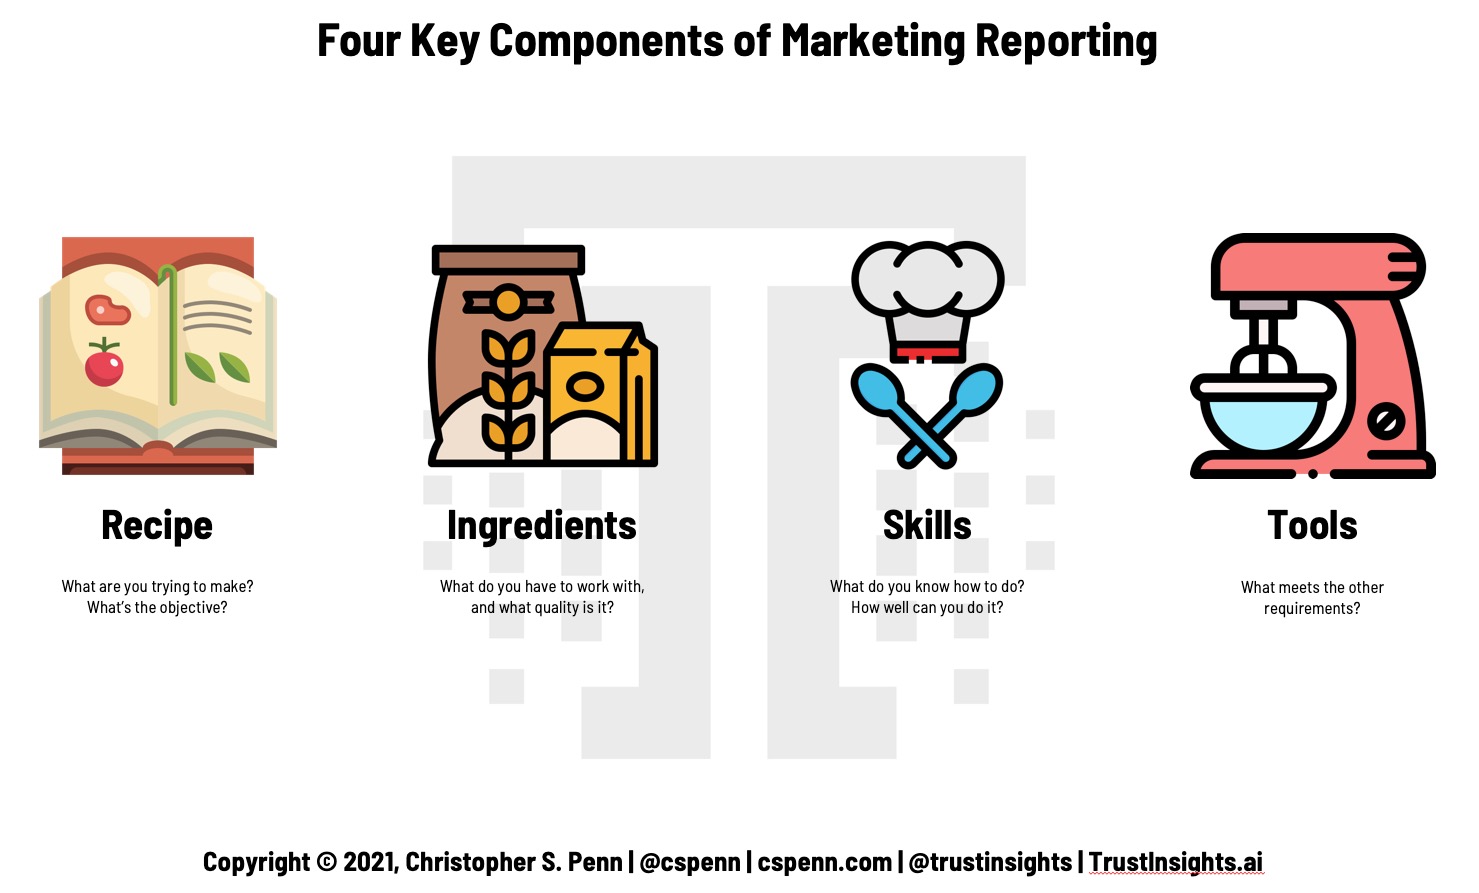 Four Key Components of Marketing Reporting